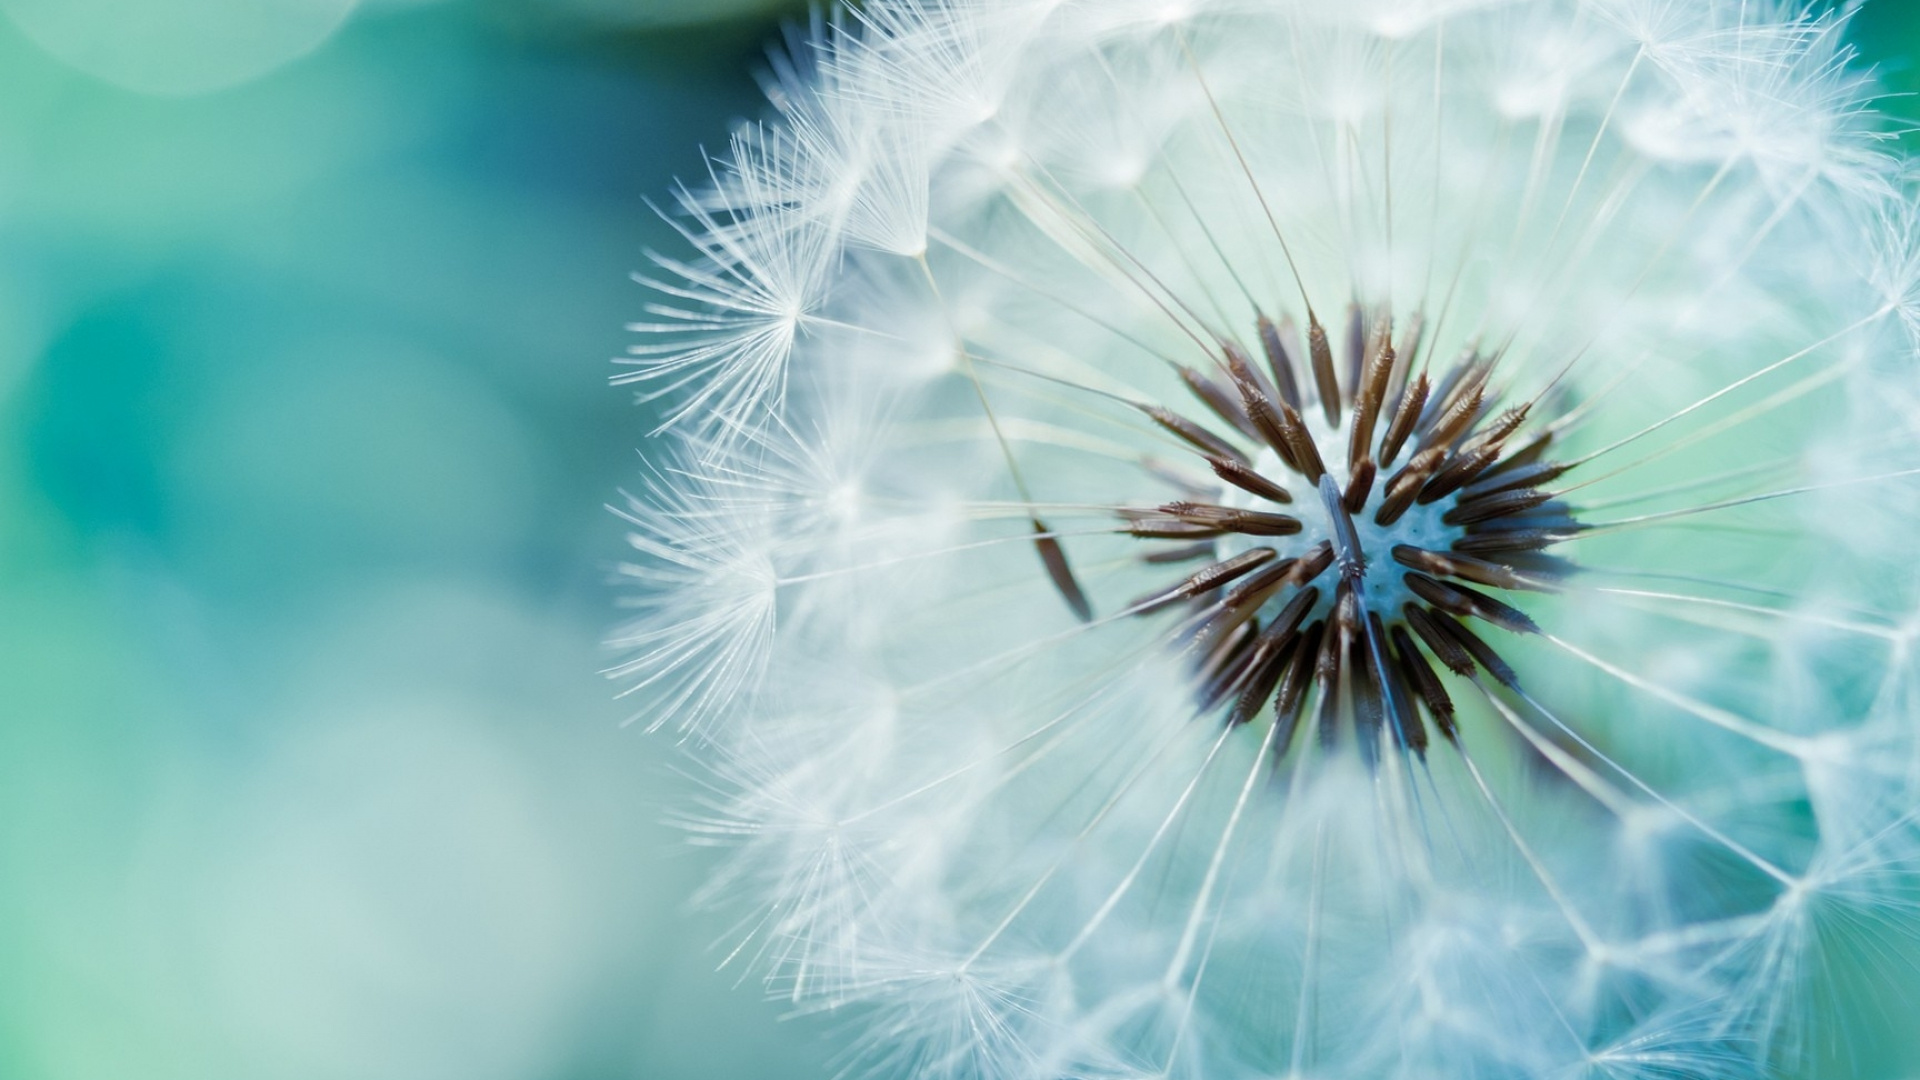 White Dandelion in Close up Photography. Wallpaper in 1920x1080 Resolution